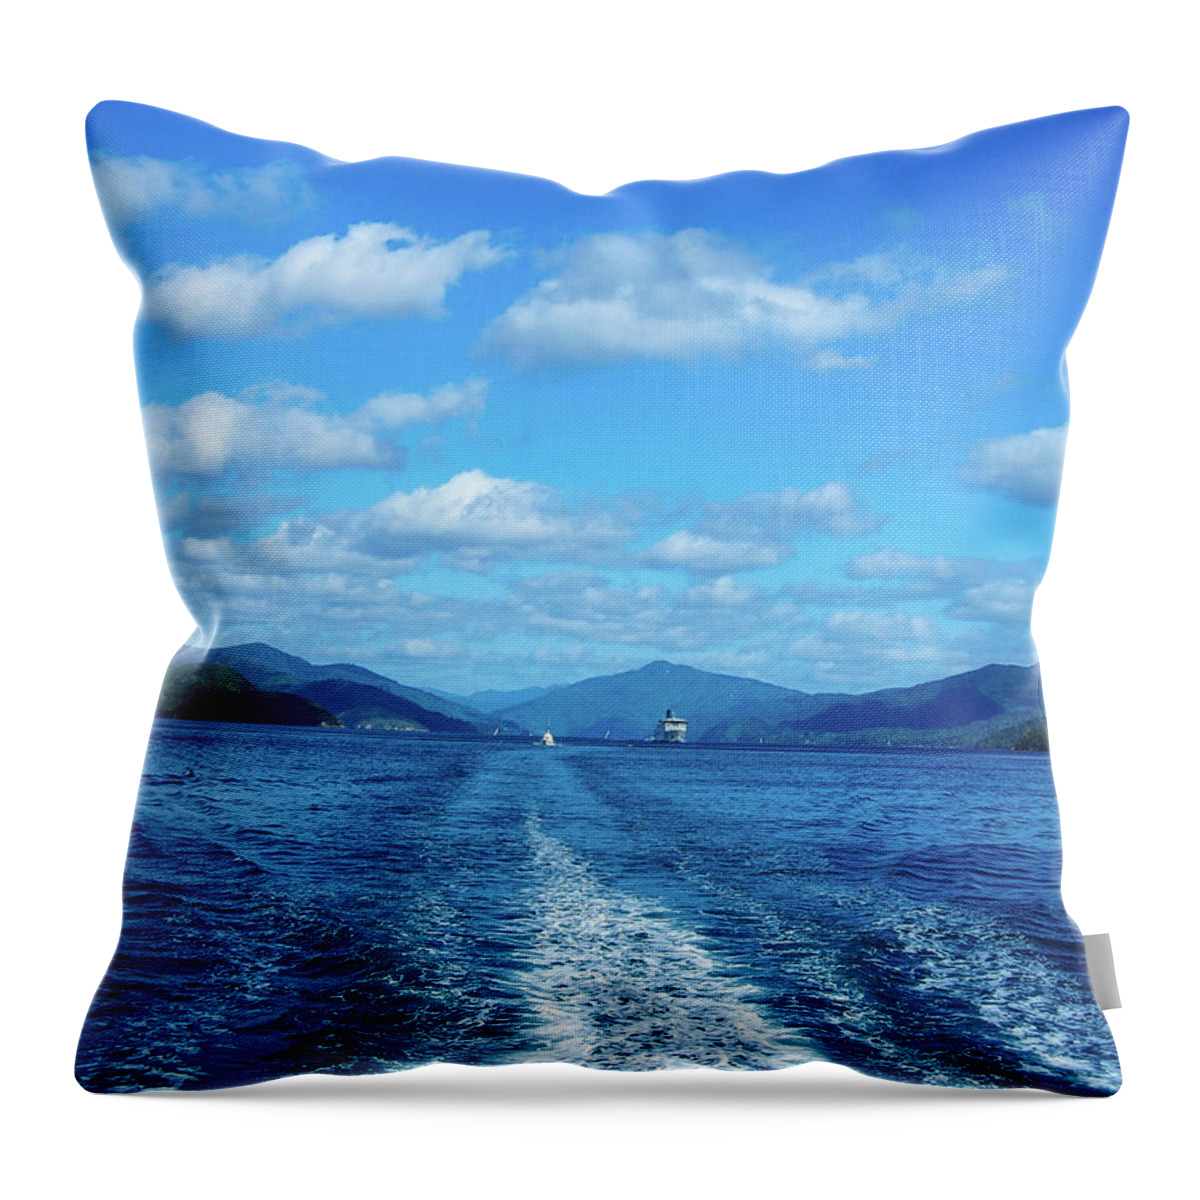 Milford Sound Throw Pillow featuring the photograph Milford Sound by Susan Gutterman